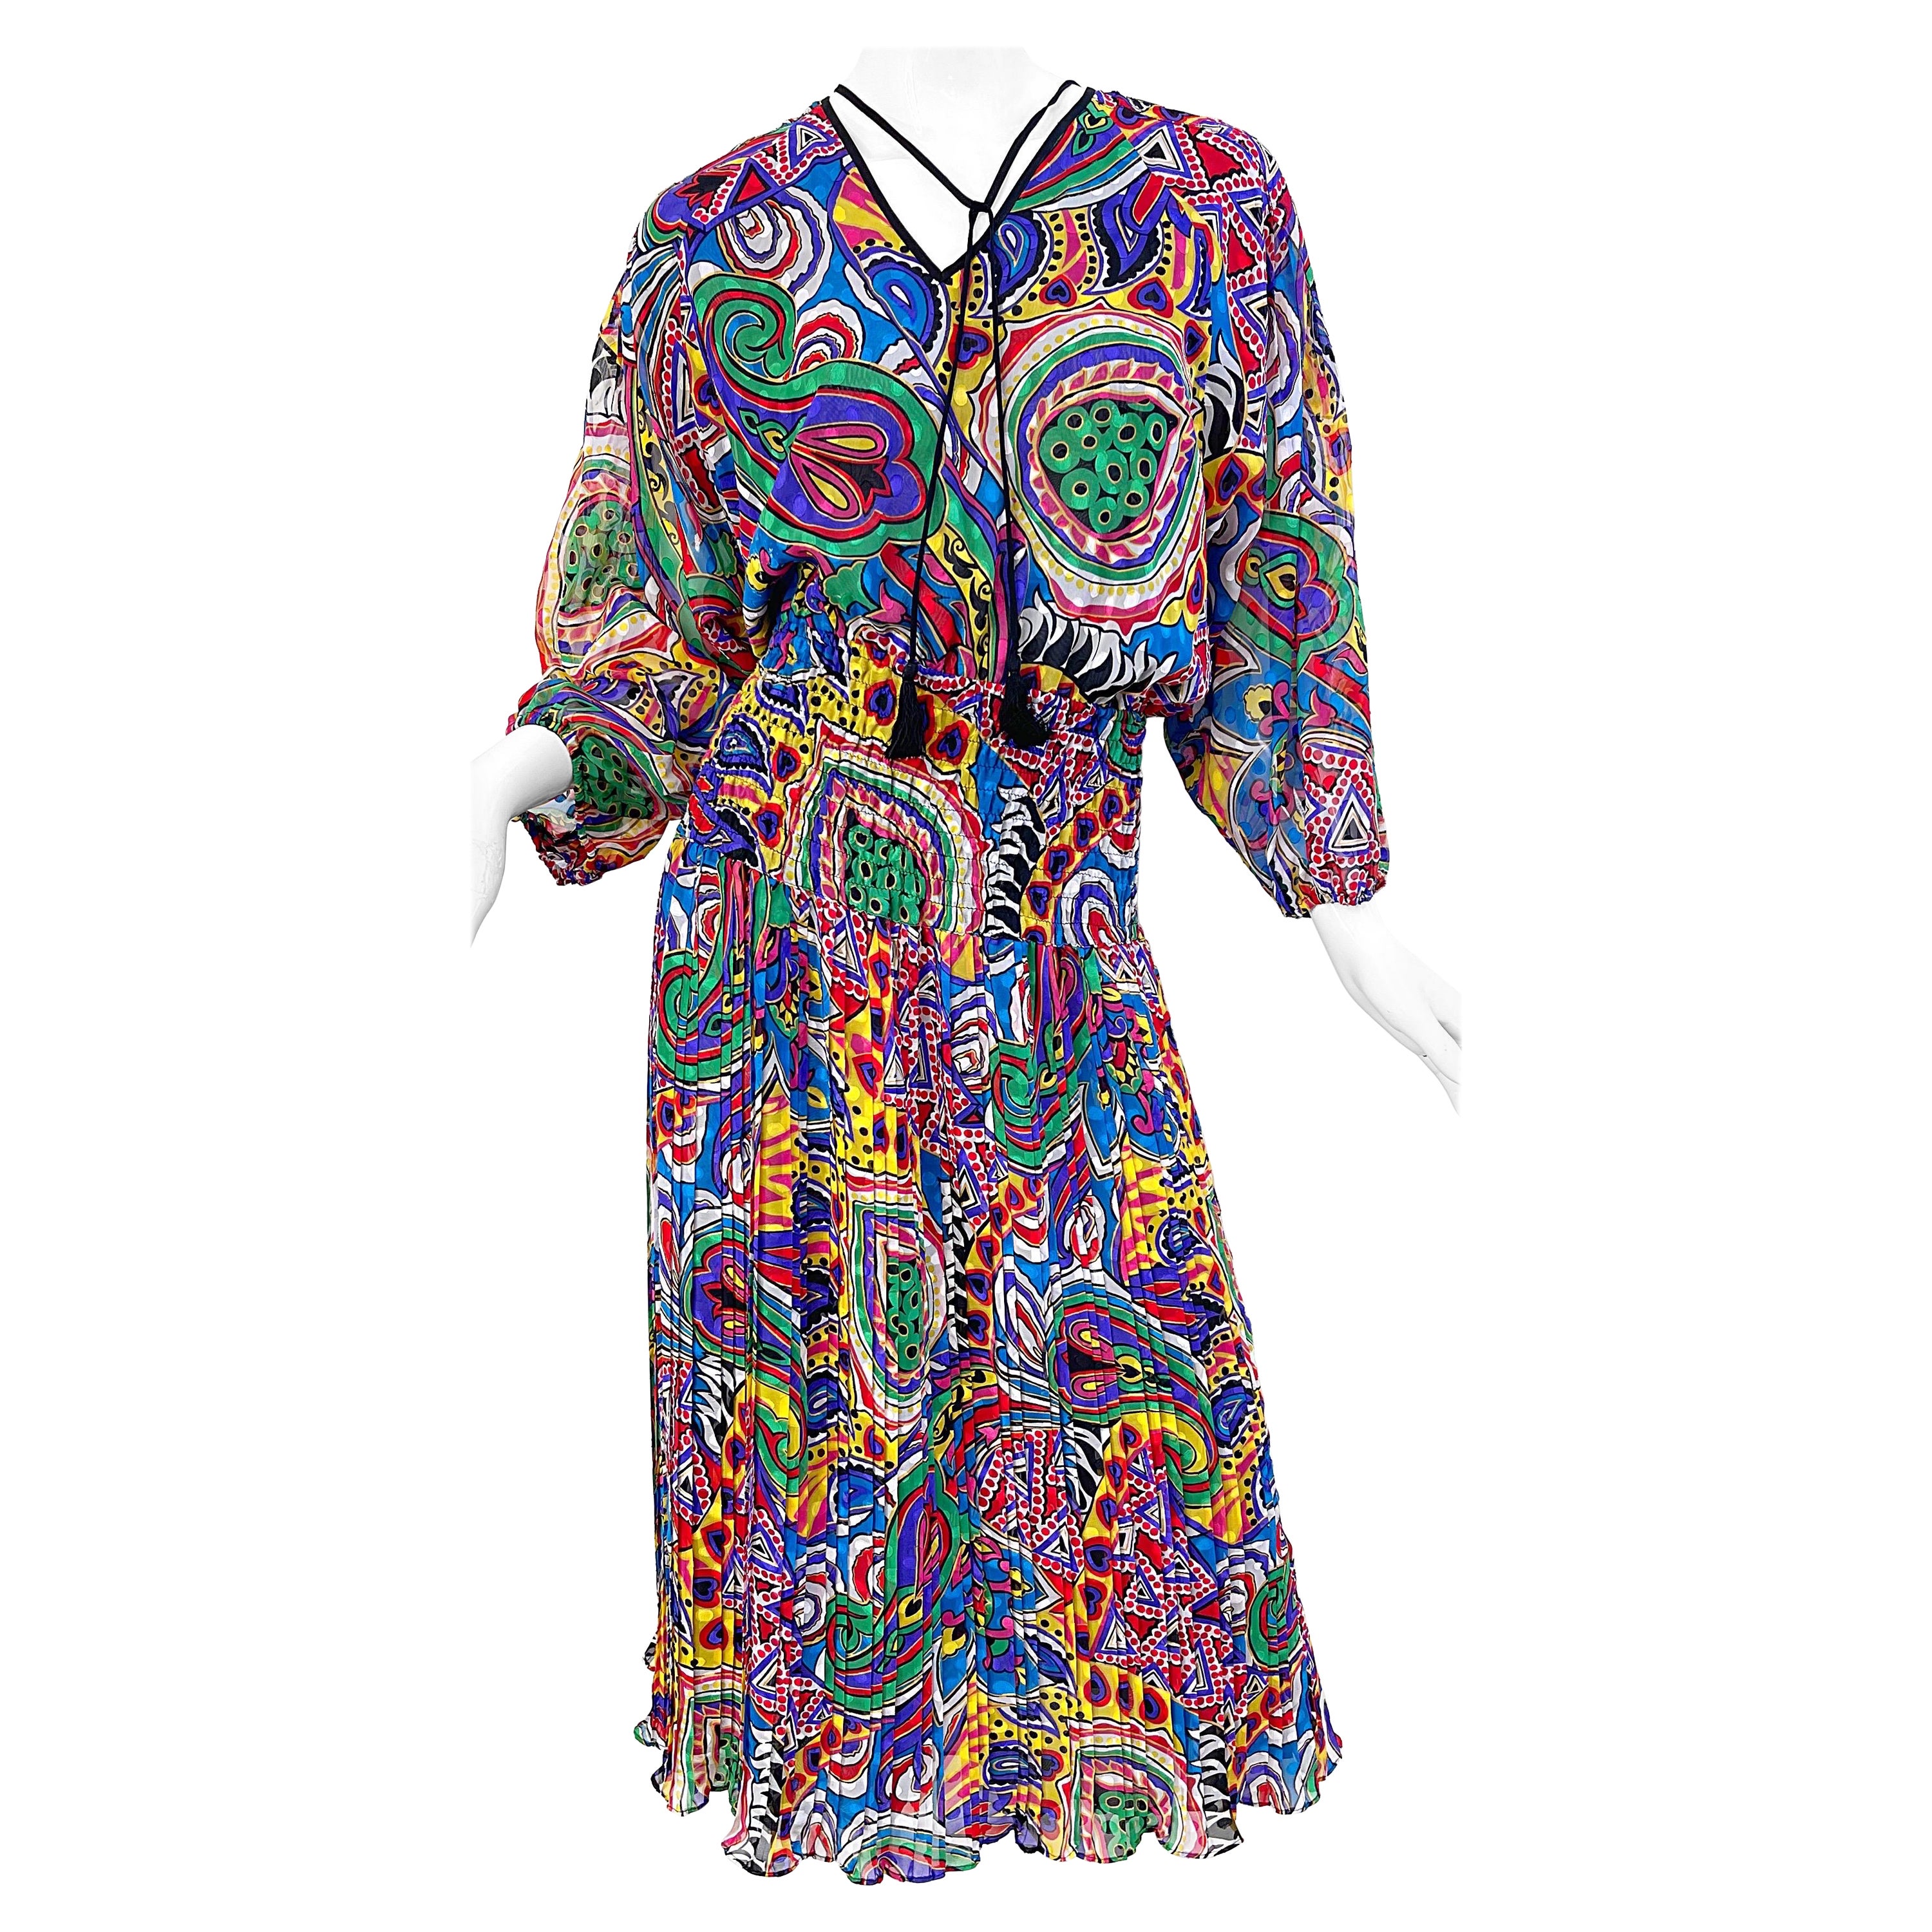 Diane Freis 1980 Novelty Heart Paisley Psychedelic Print Vintage 80s Dress